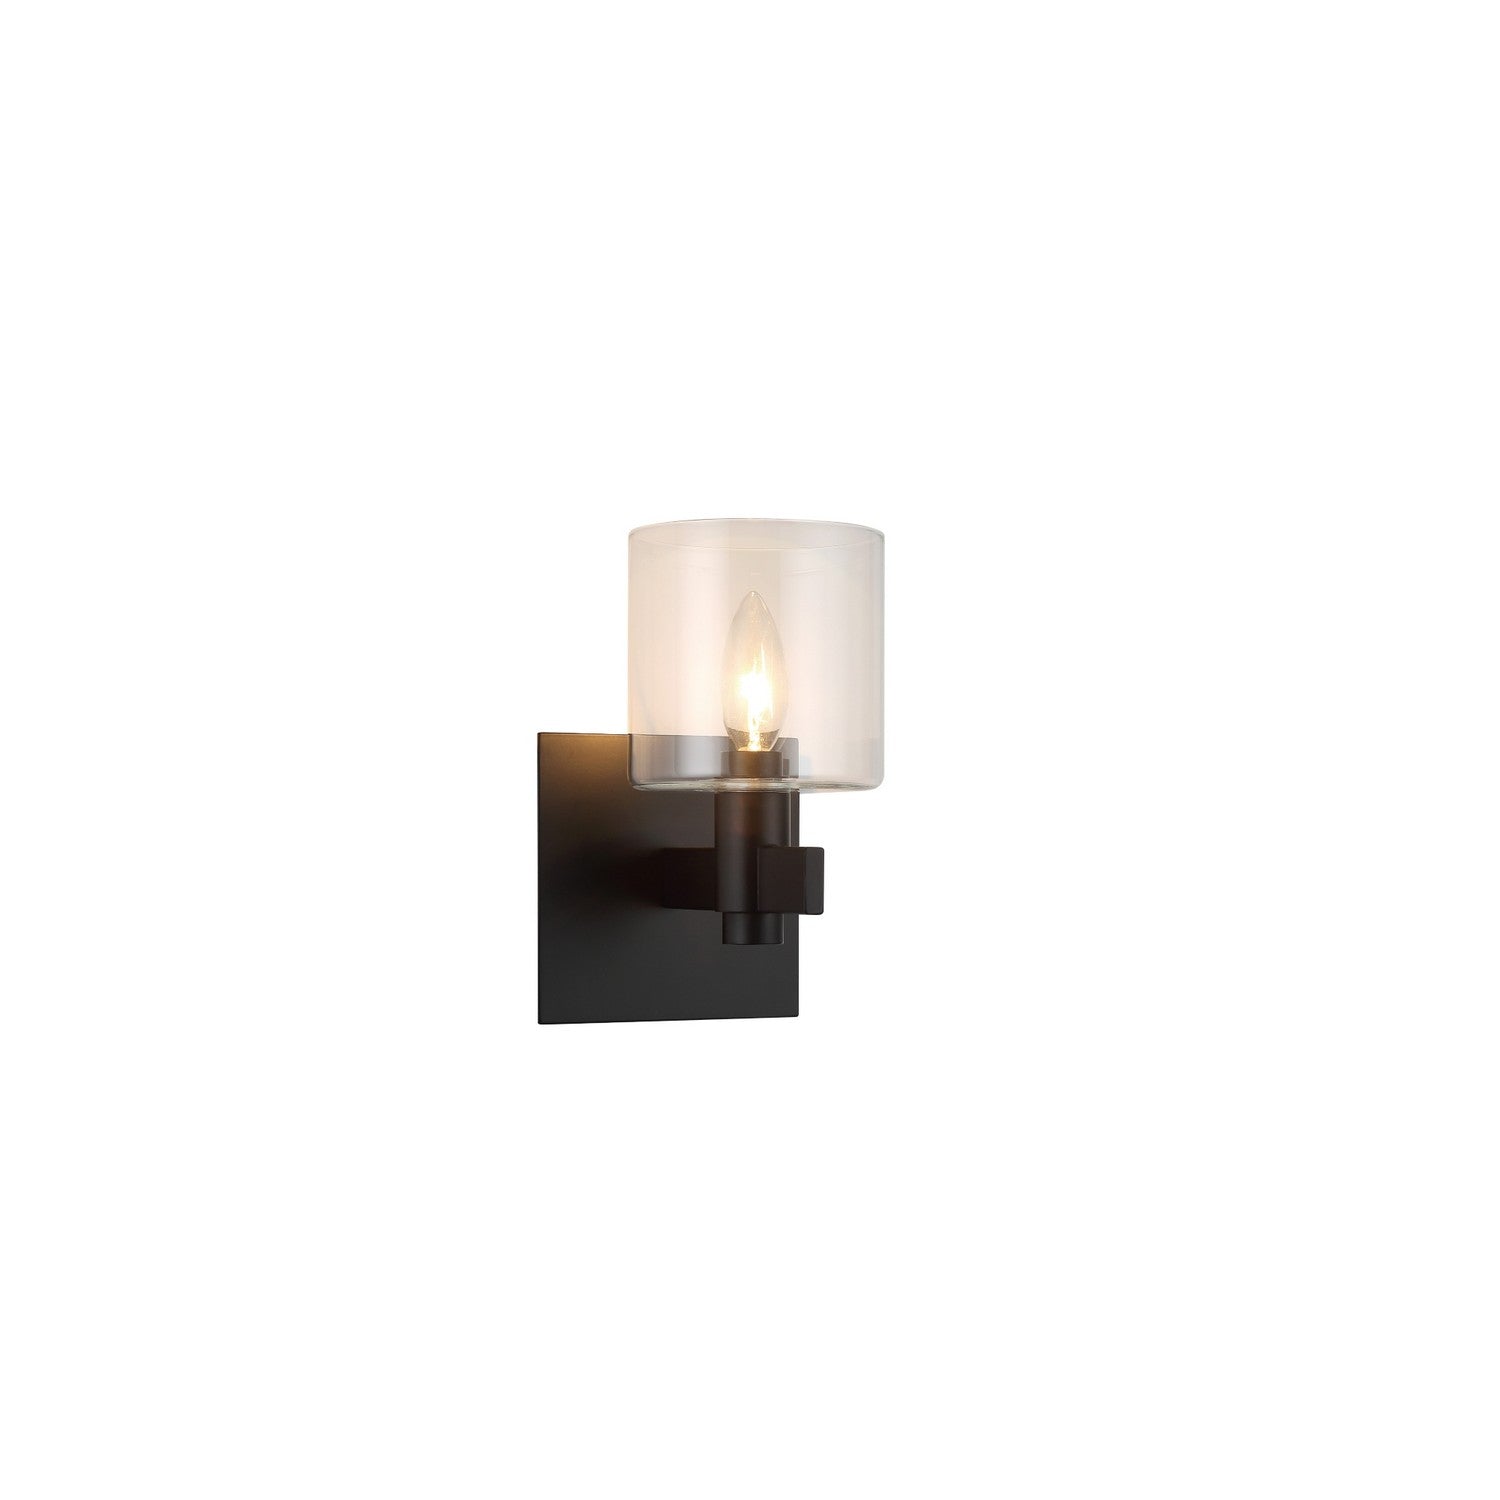 Decato Wall Sconce